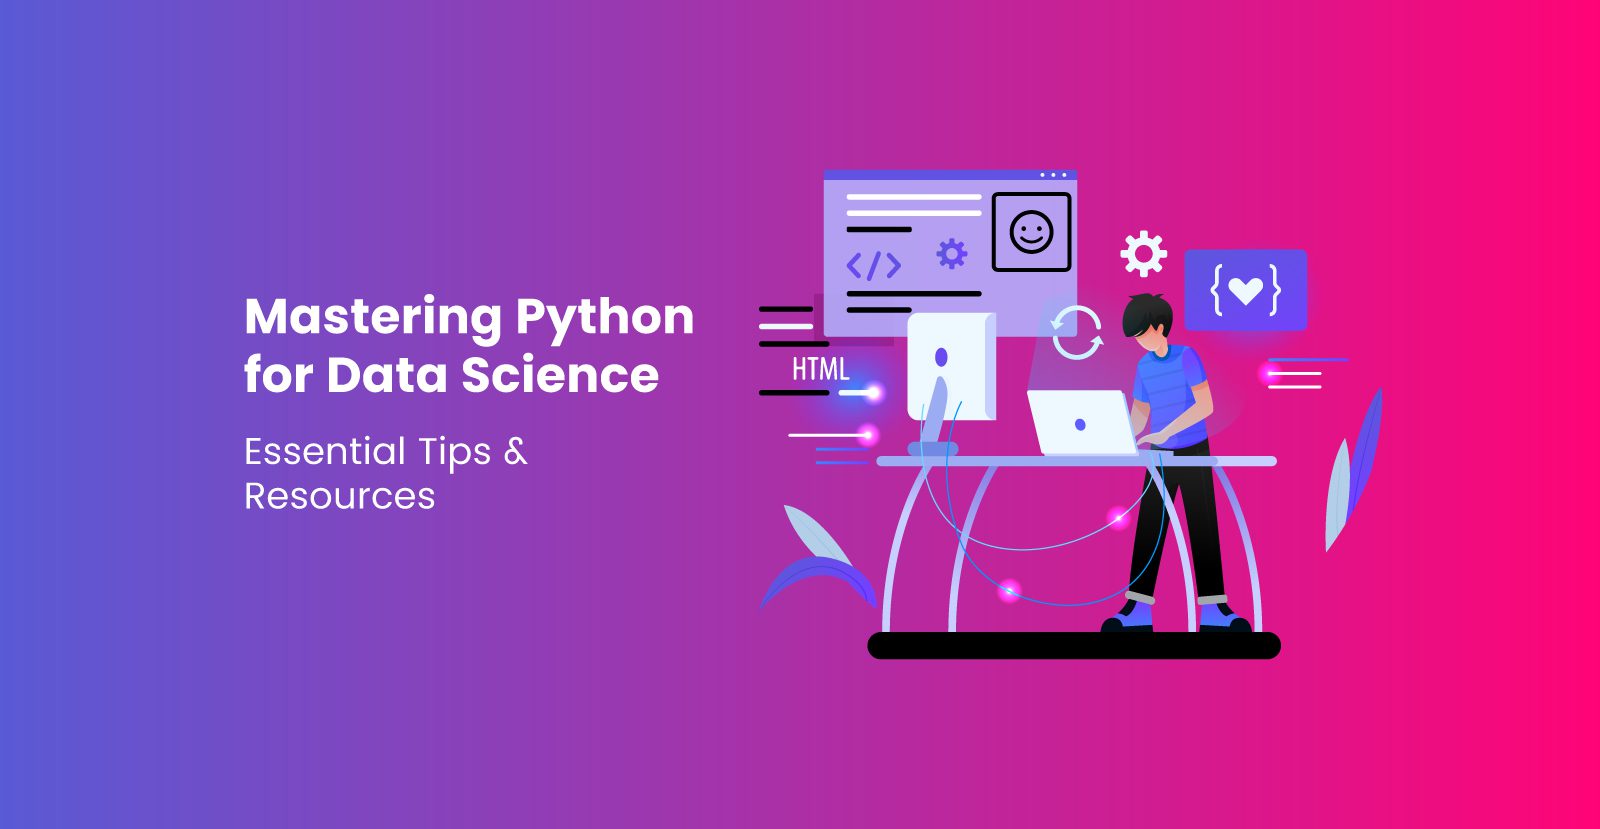 Python for data science